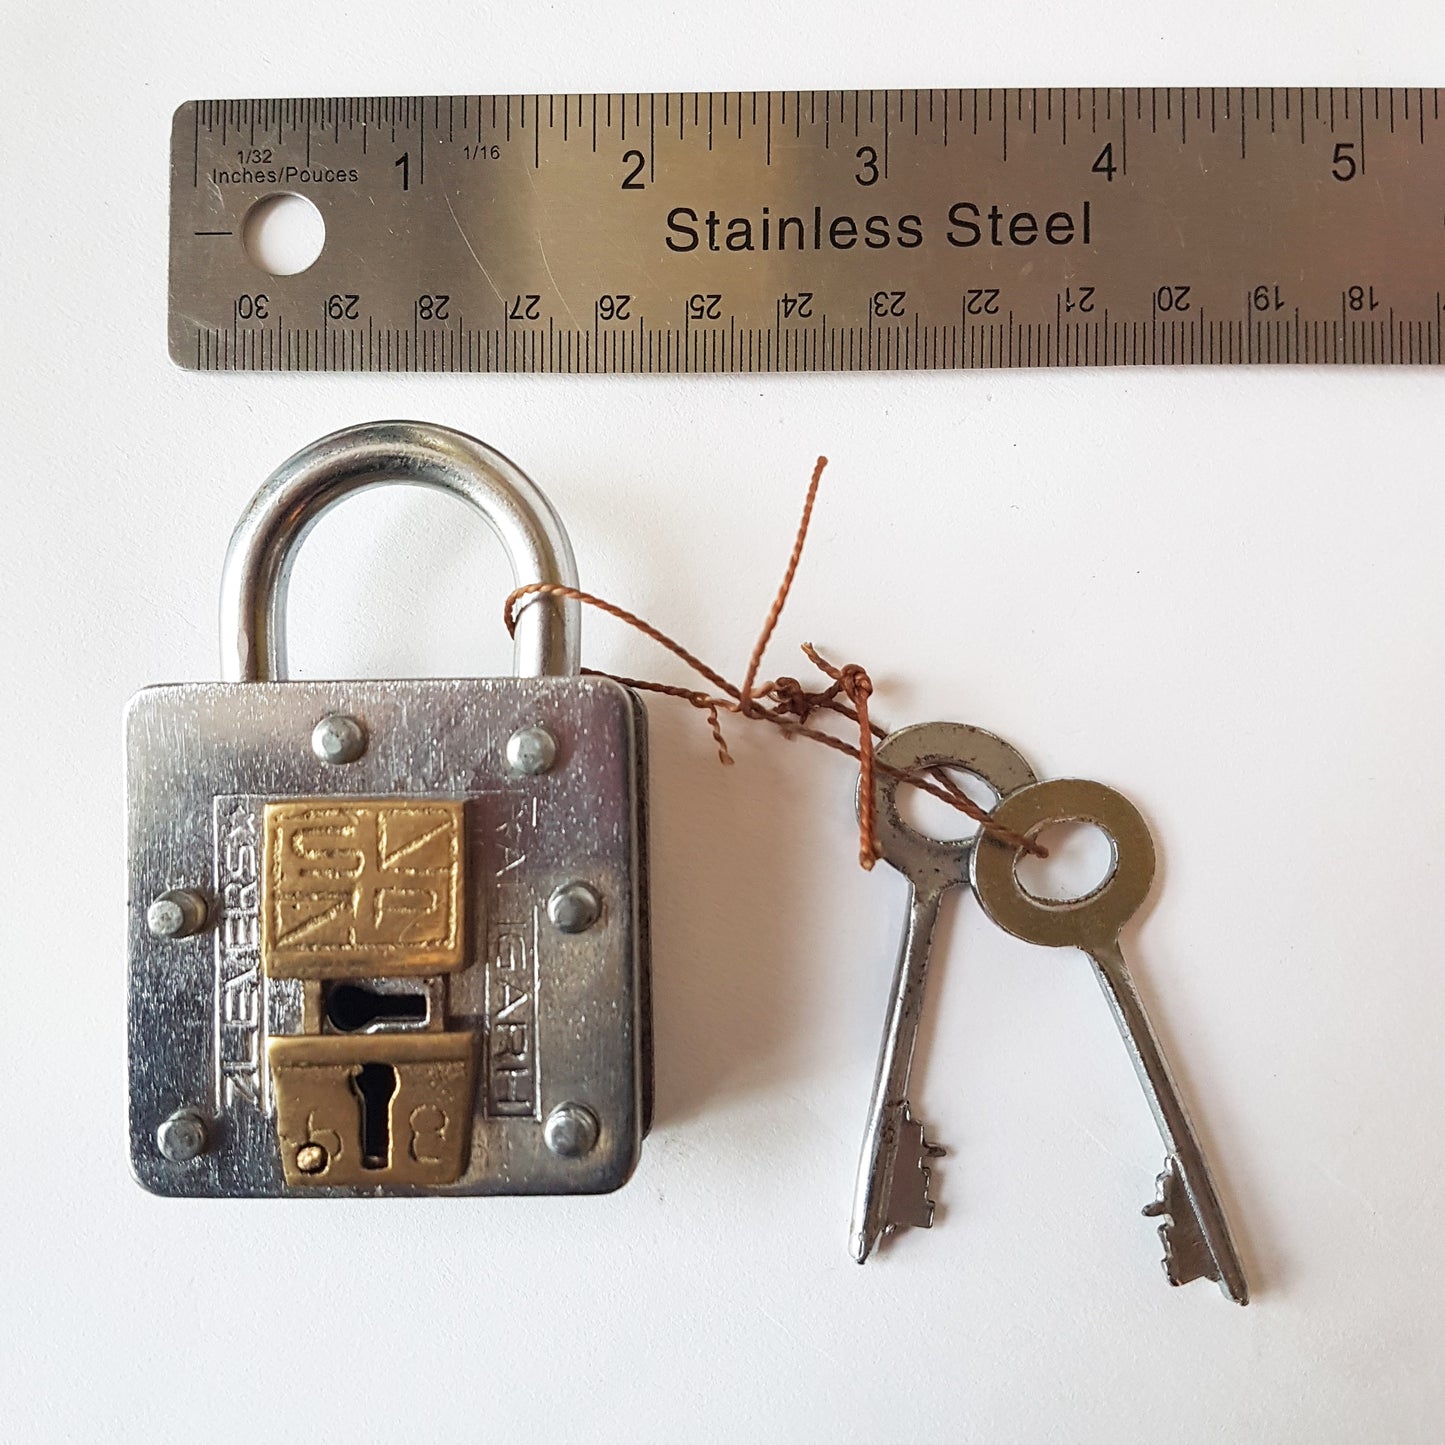 Pad lock, antique 2 key puzzle lock. Functional pad lock with tricky hidden key hole. Collectible vintage pad lock, 2 key lock.